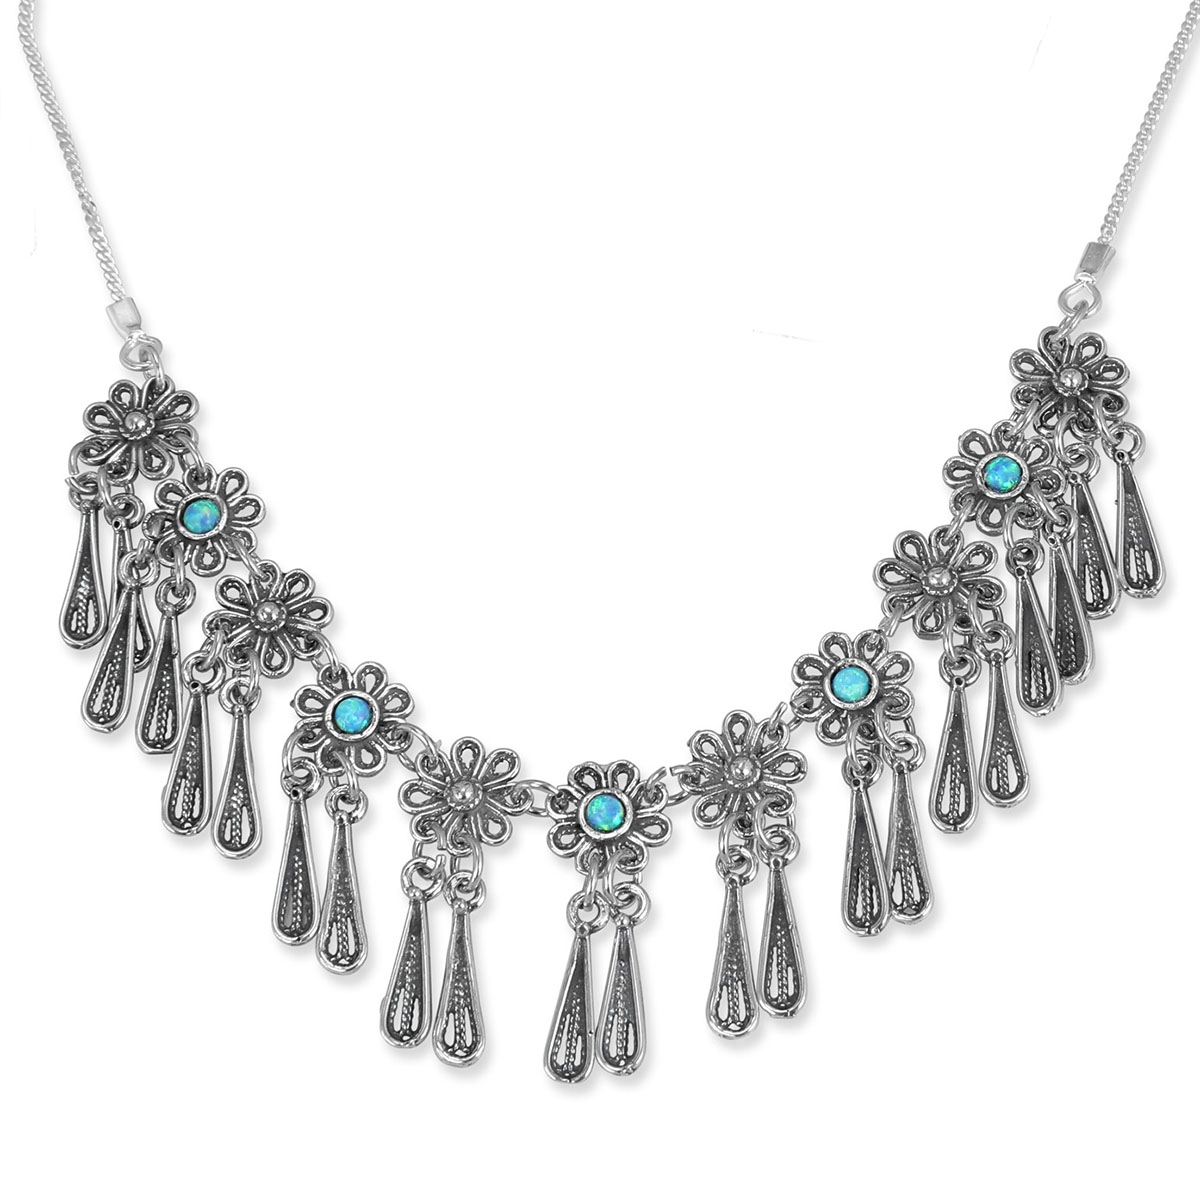 Traditional Yemenite Art Handcrafted Sterling Silver and Opal Necklace With Flower and Teardrop Design - 1